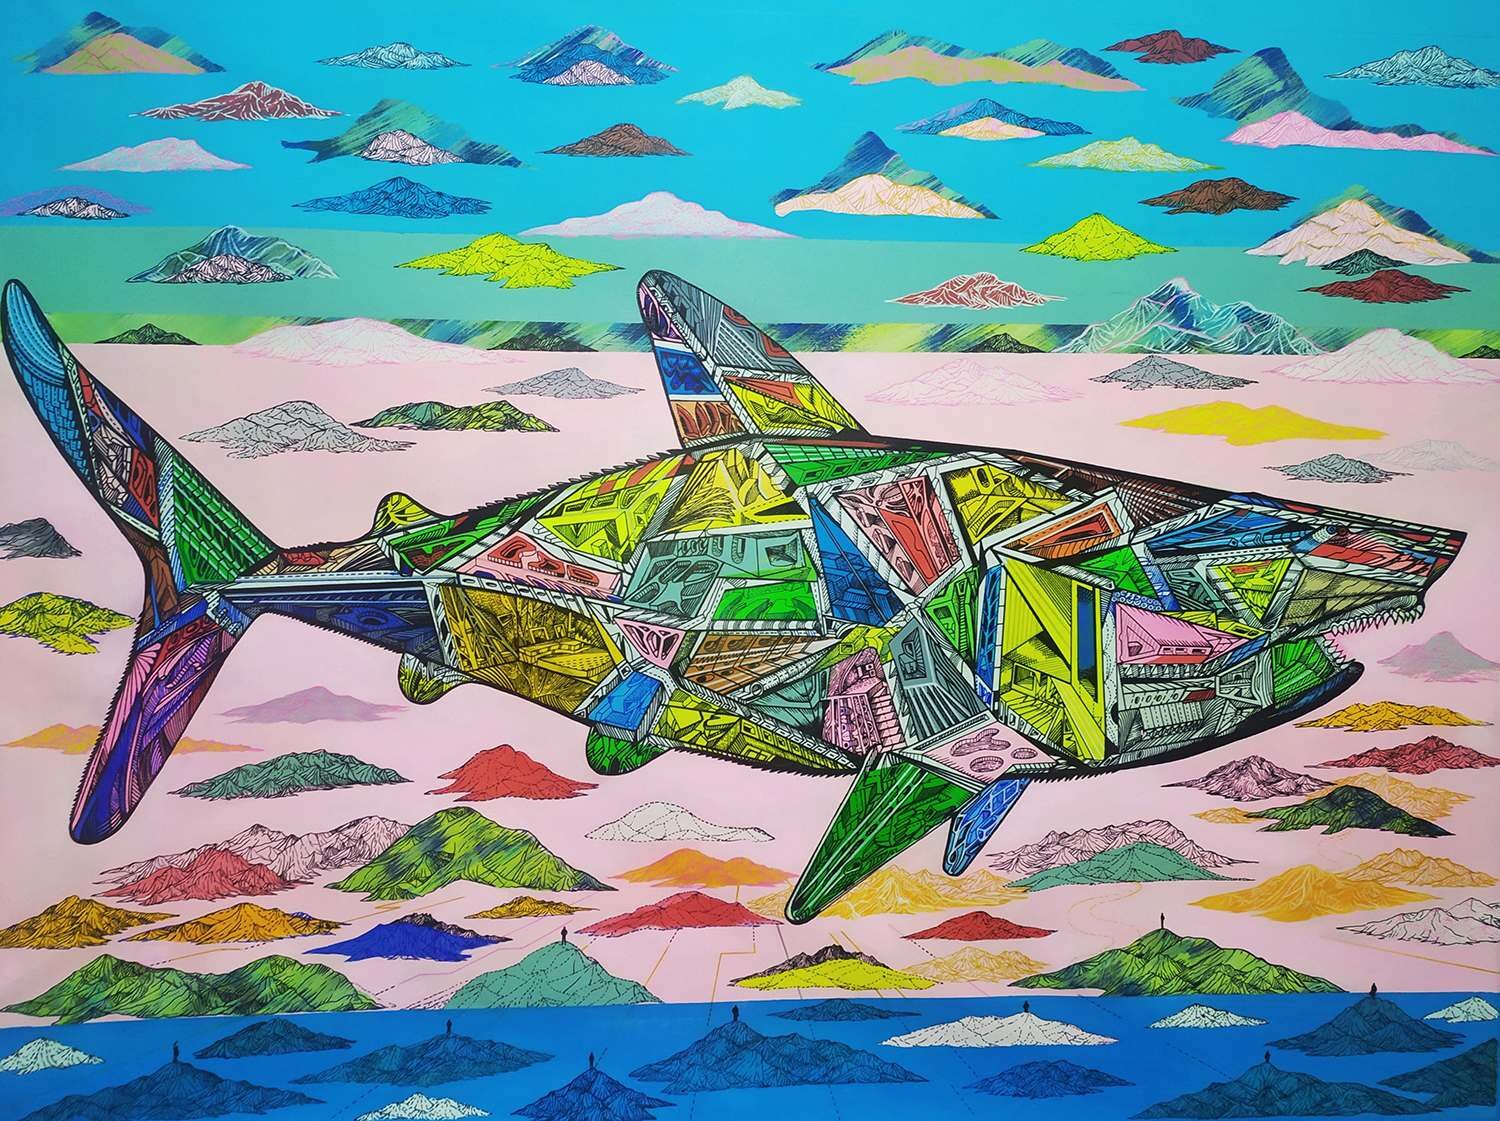 Levitator is an acrylic painting on canvas, representing a colorful white shark that wanders above the colorful desert dunes. Art by Marko Gavrilovic.